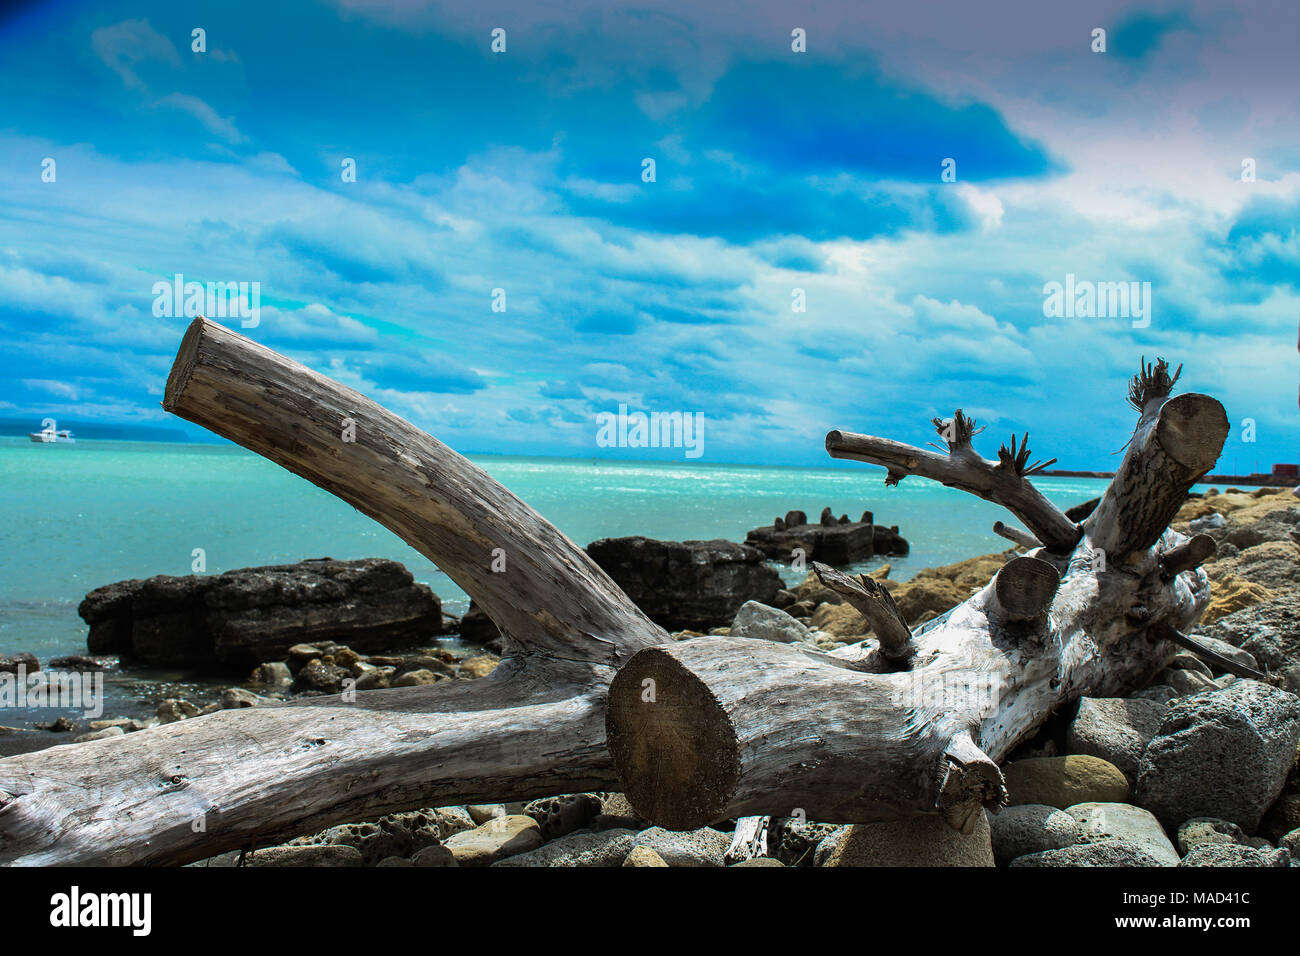 A log resting near a beach with the beautiful clouds above it on an overcast day. The contrast between the darker and lighter shades creates drama. Stock Photo